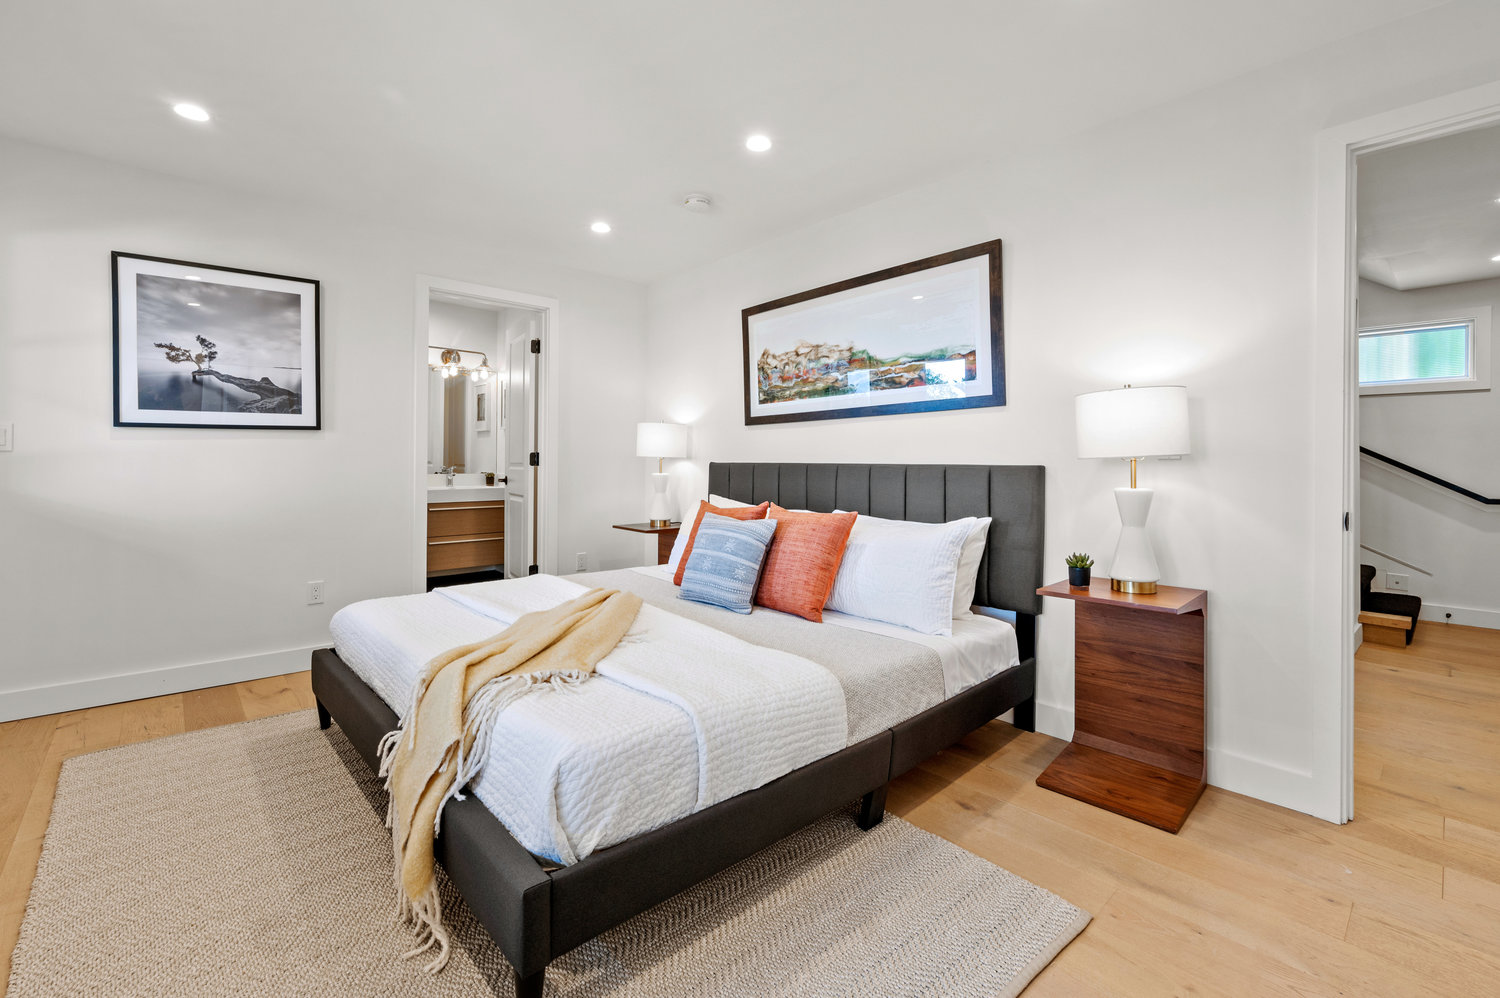 Property Photo: Primary bedroom, featuring wood floors and an ensuite bath